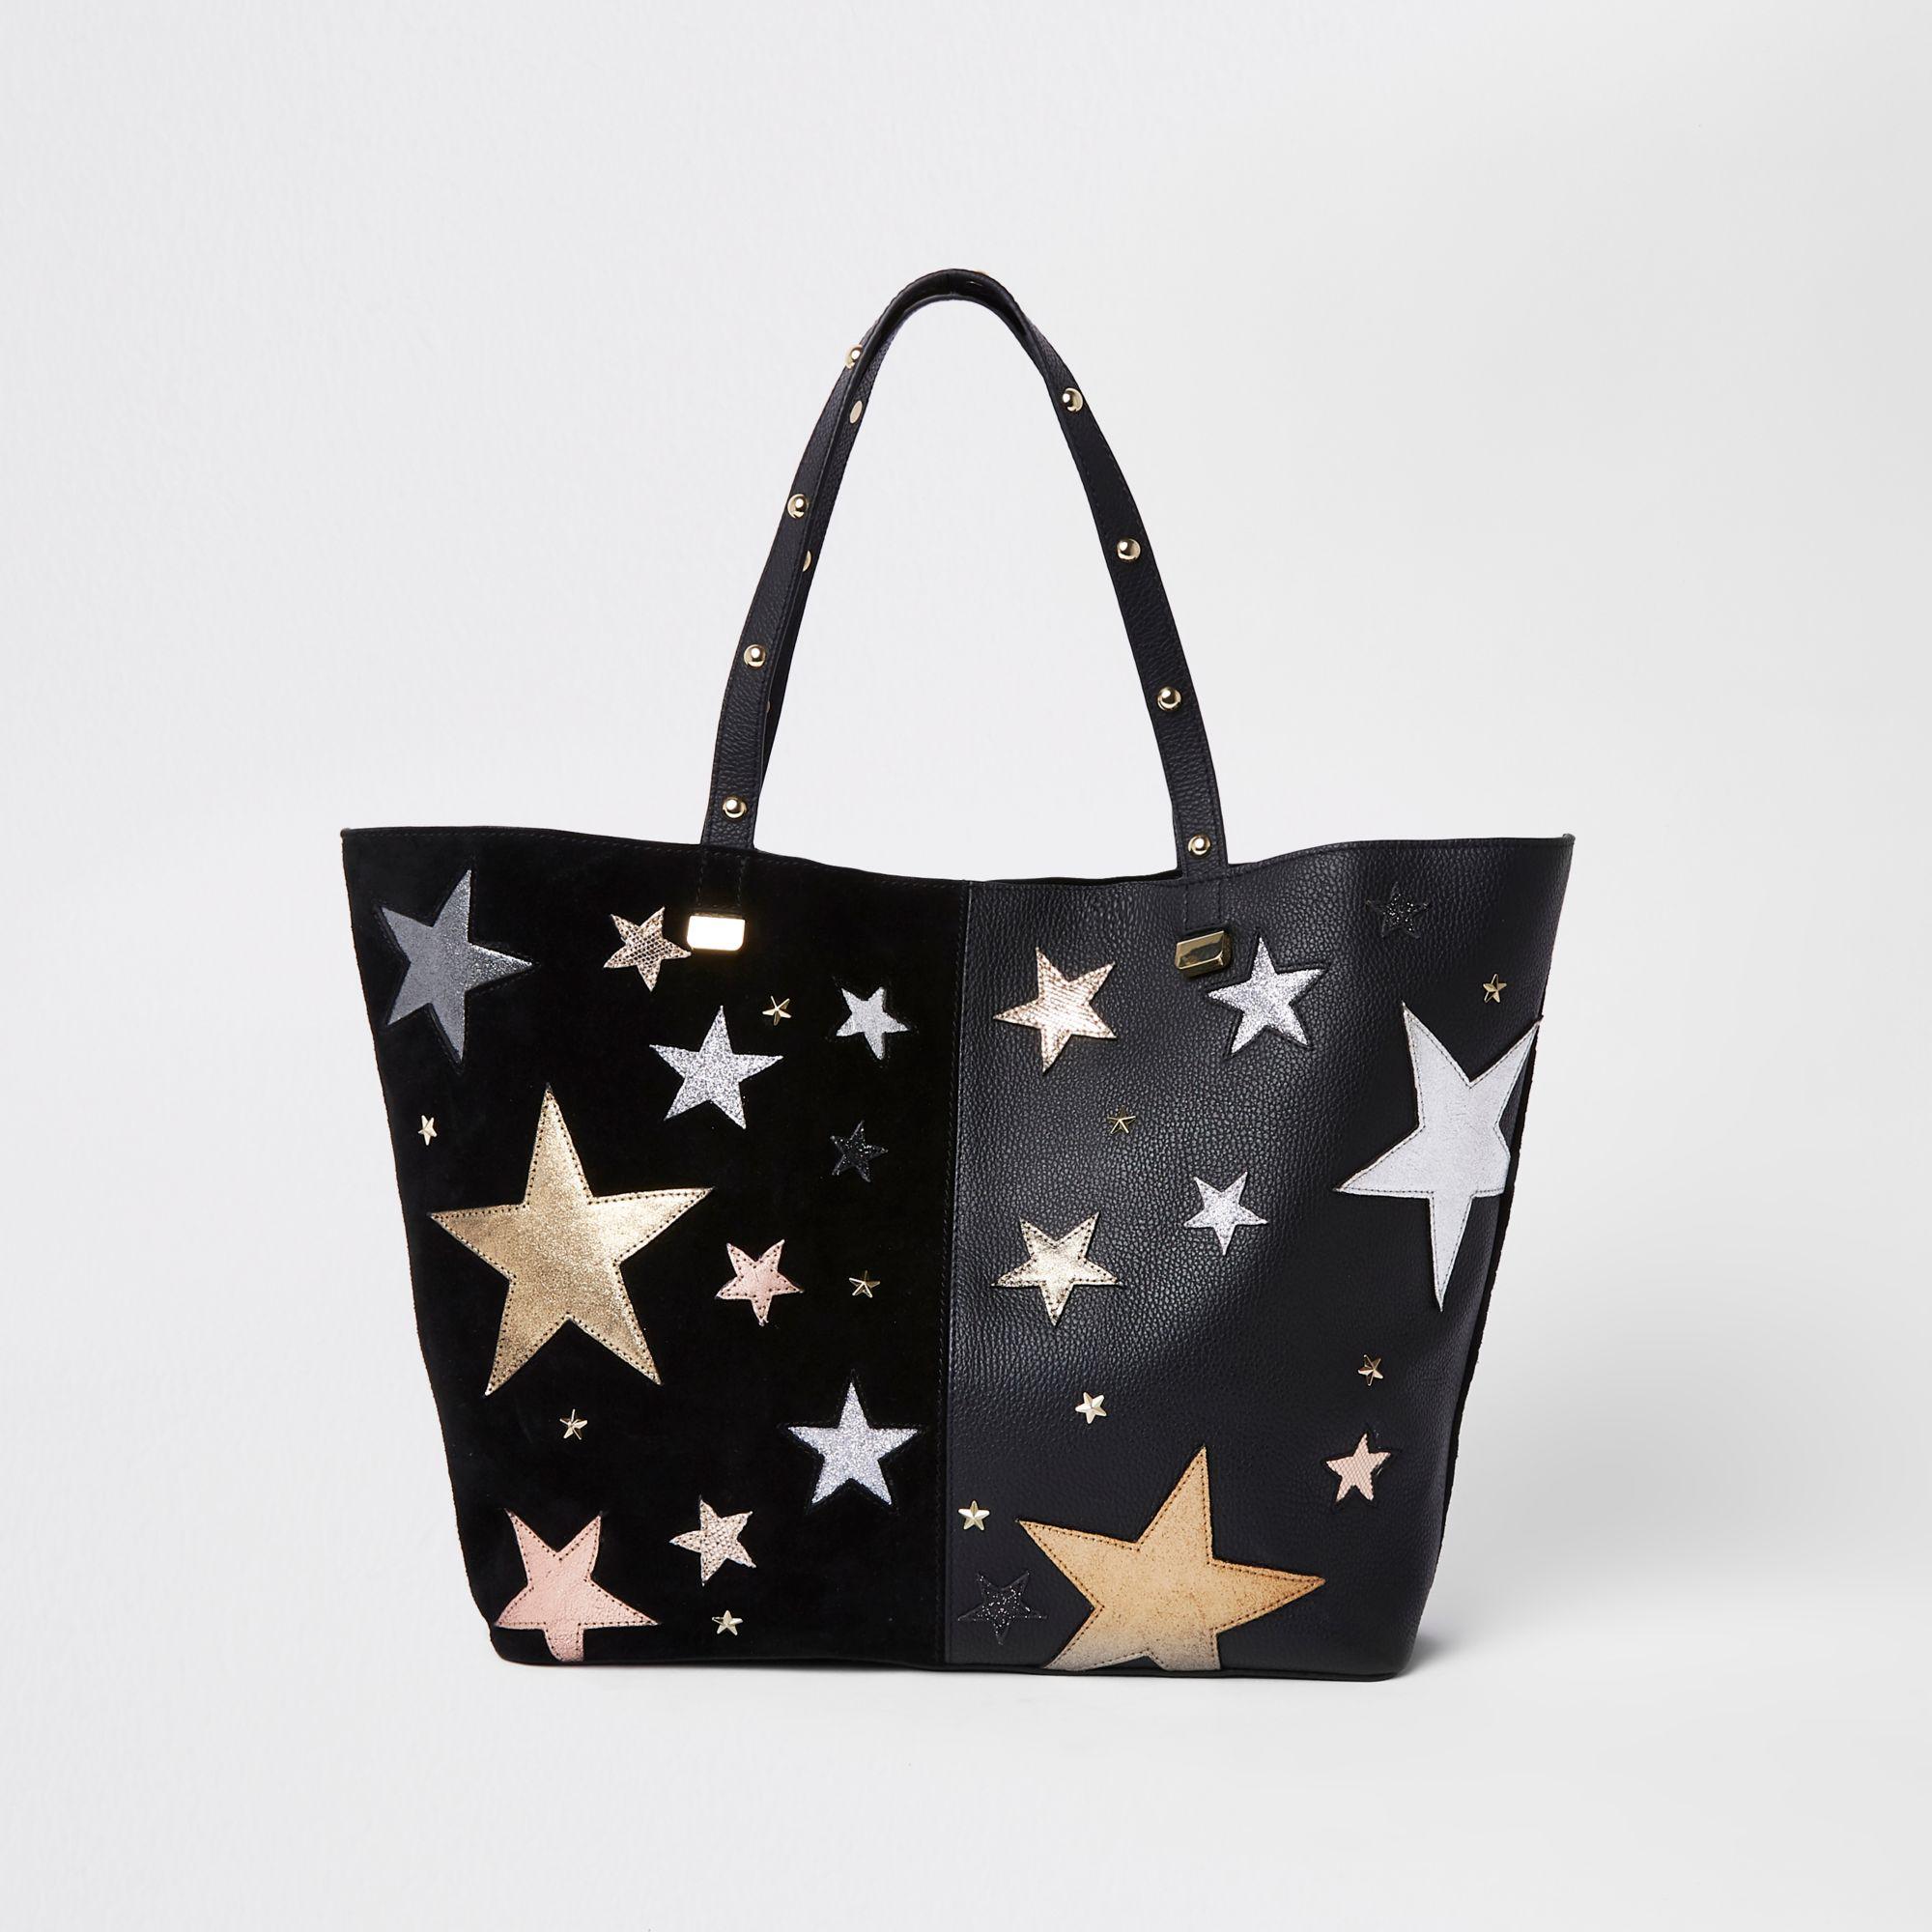 River Island Leather Star Embroidered Tote Bag in Black | Lyst